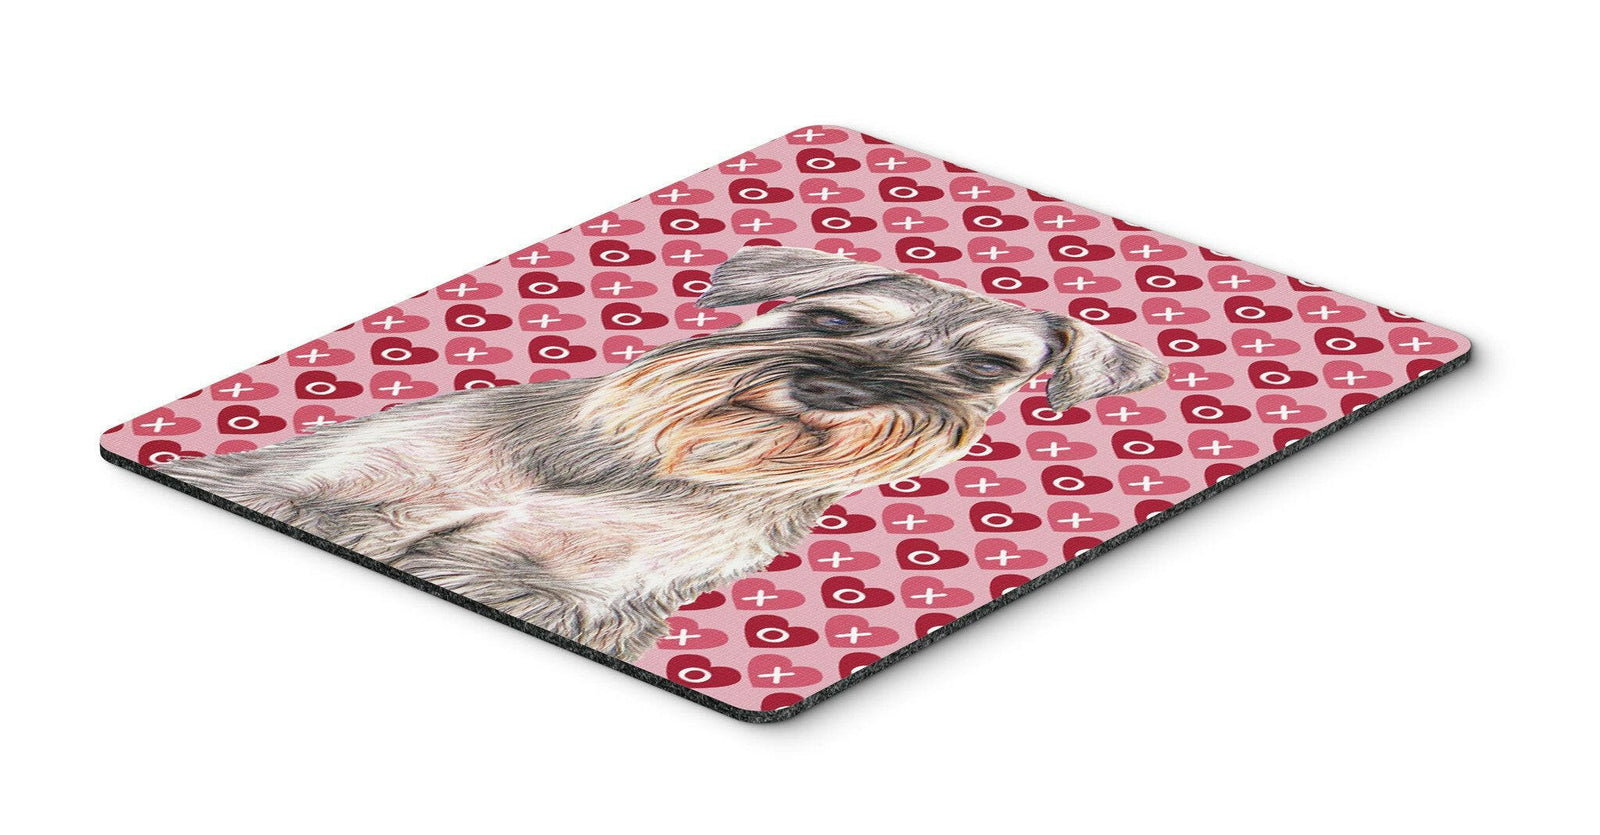 Hearts Love and Valentine's Day Schnauzer Mouse Pad, Hot Pad or Trivet KJ1193MP by Caroline's Treasures